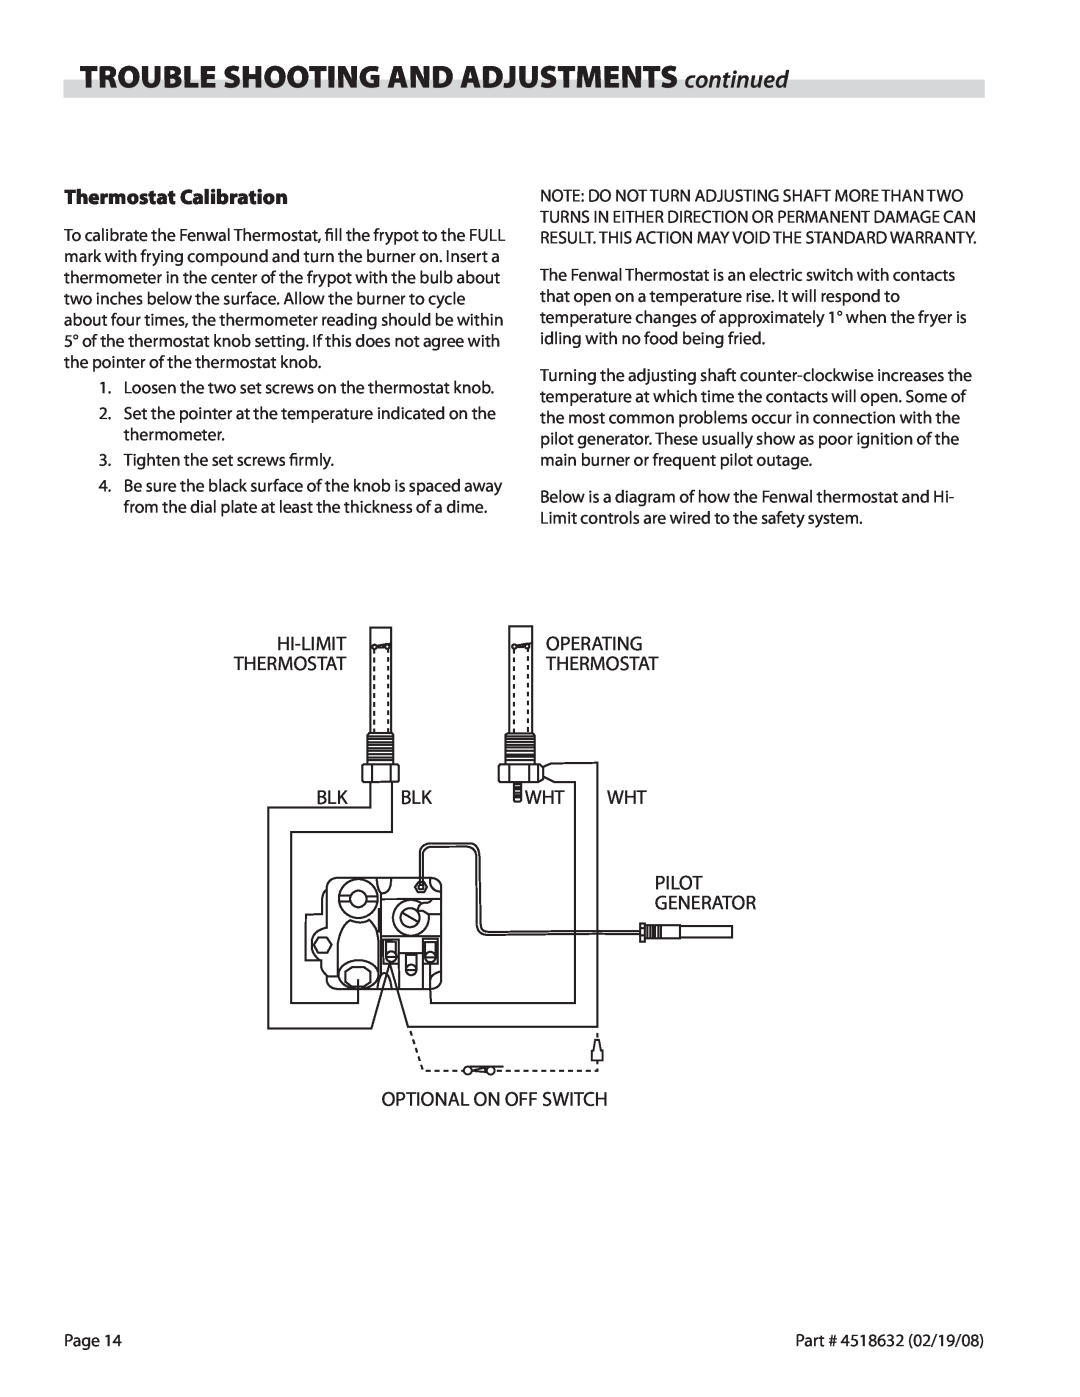 Garland C836-1-35F operation manual TROUBLE SHOOTING AND ADJUSTMENTS continued, Thermostat Calibration 